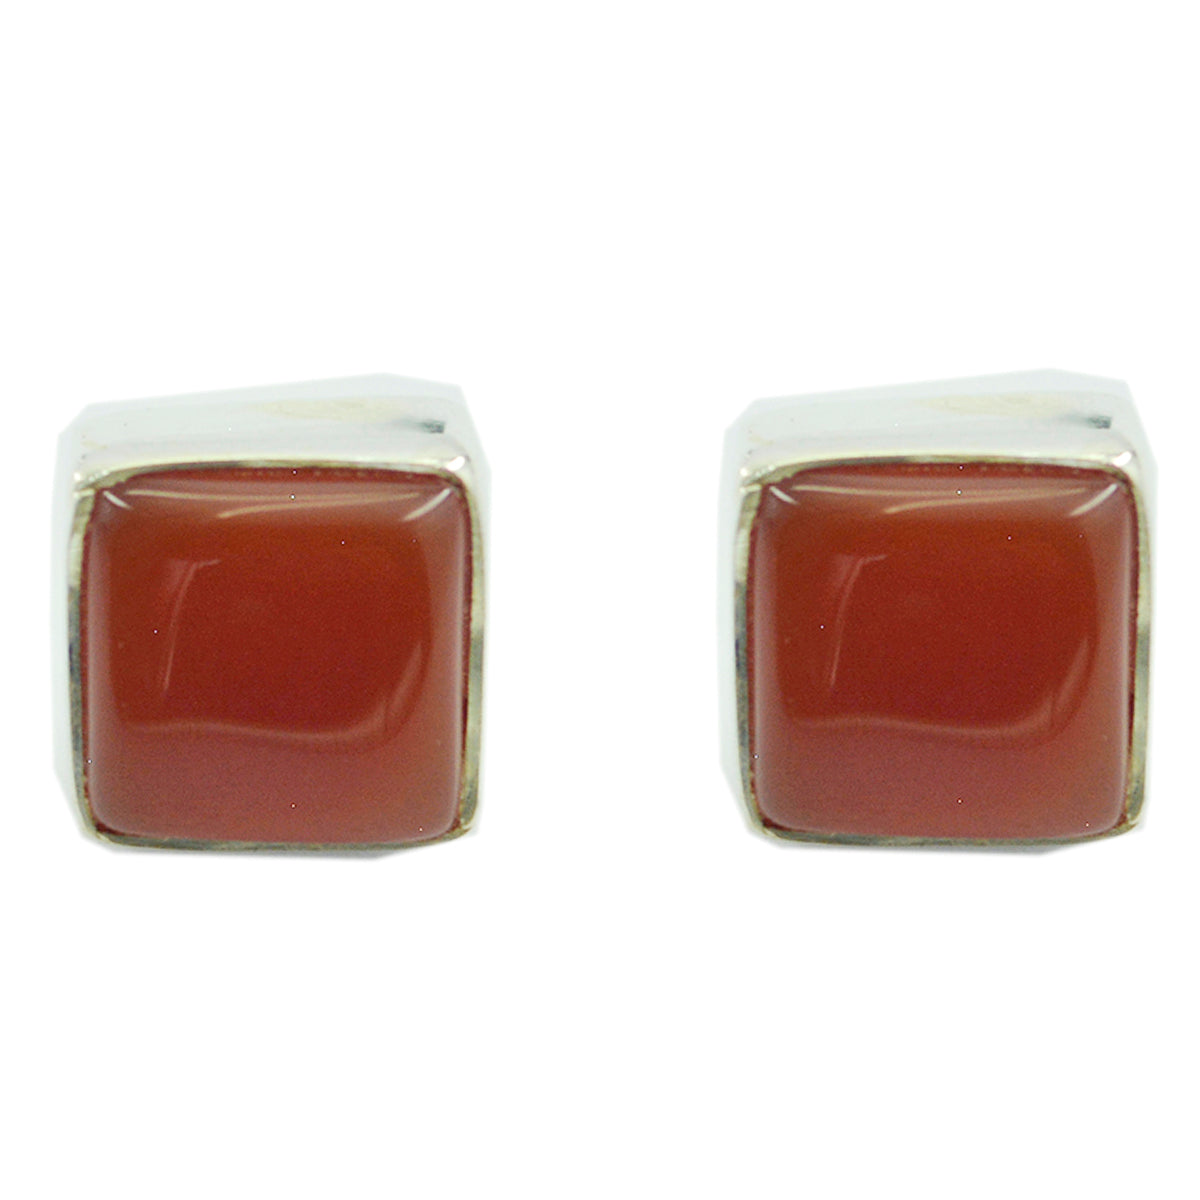 Riyo Real Gemstones square Cabochon Red Onyx Silver Earrings gift for labour day